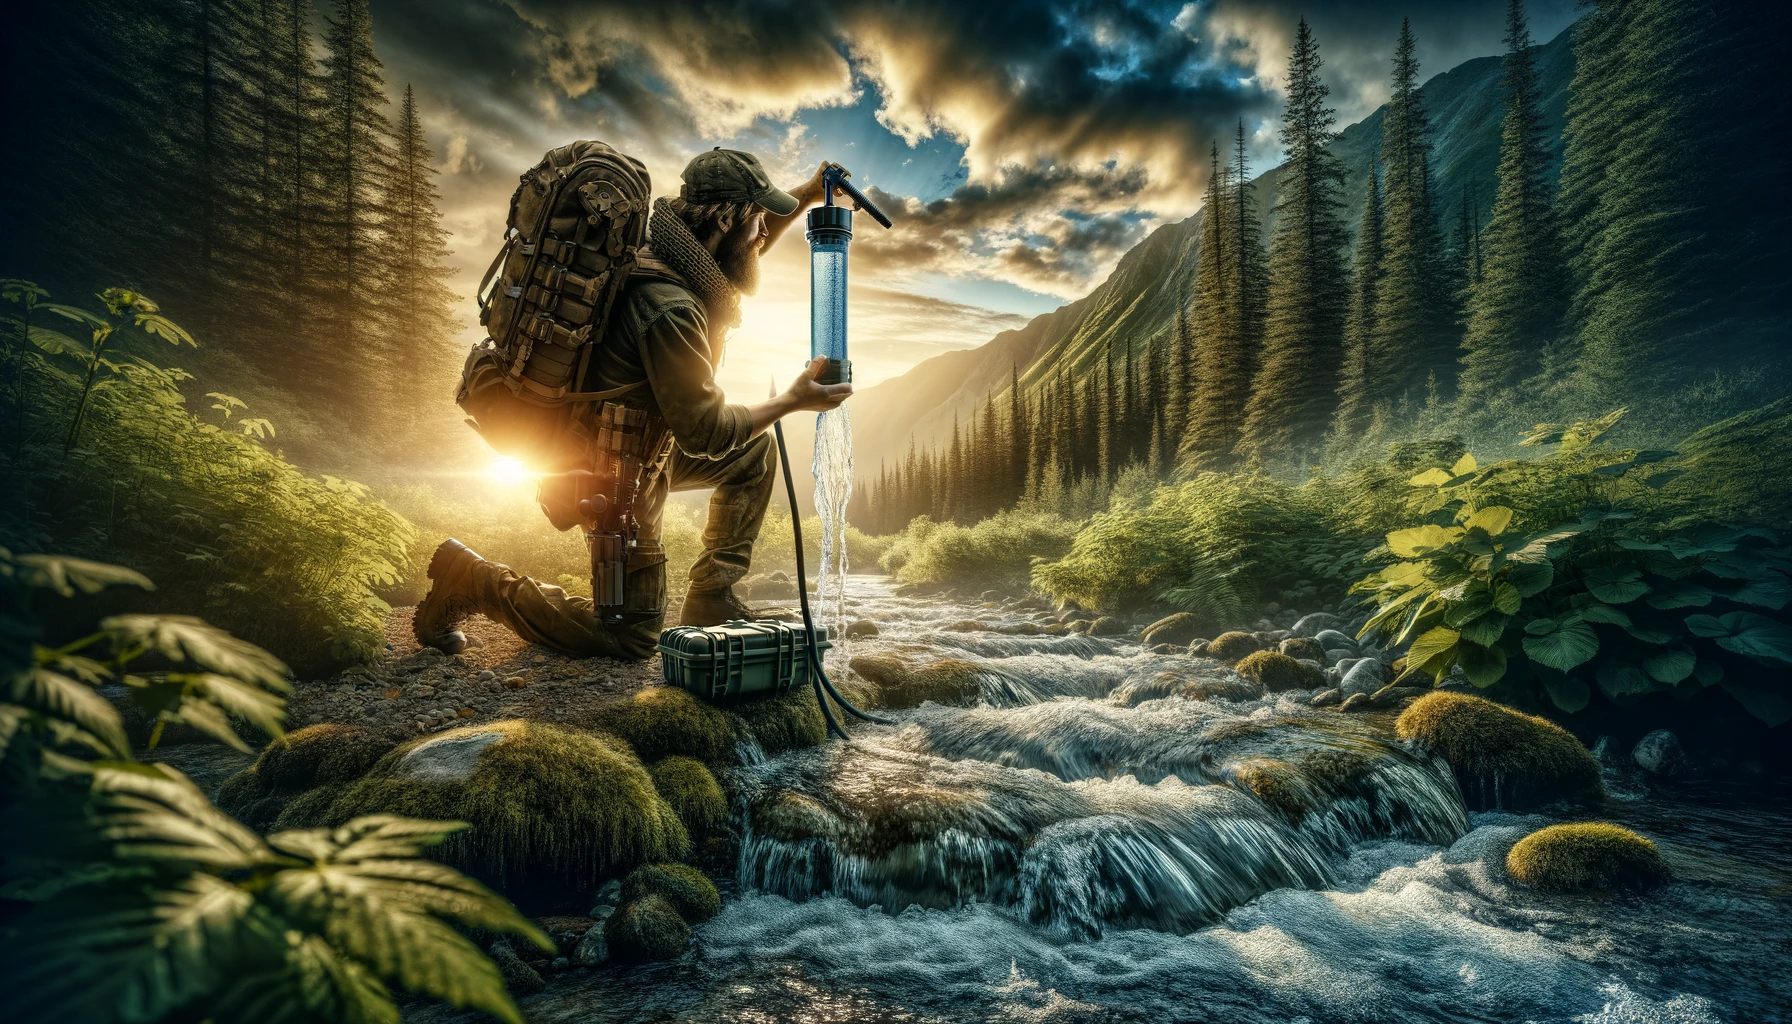 A rugged individual purifies water using a high-tech portable filter at a stream in a dense forest at sunset, highlighting the importance of water filtration for survival